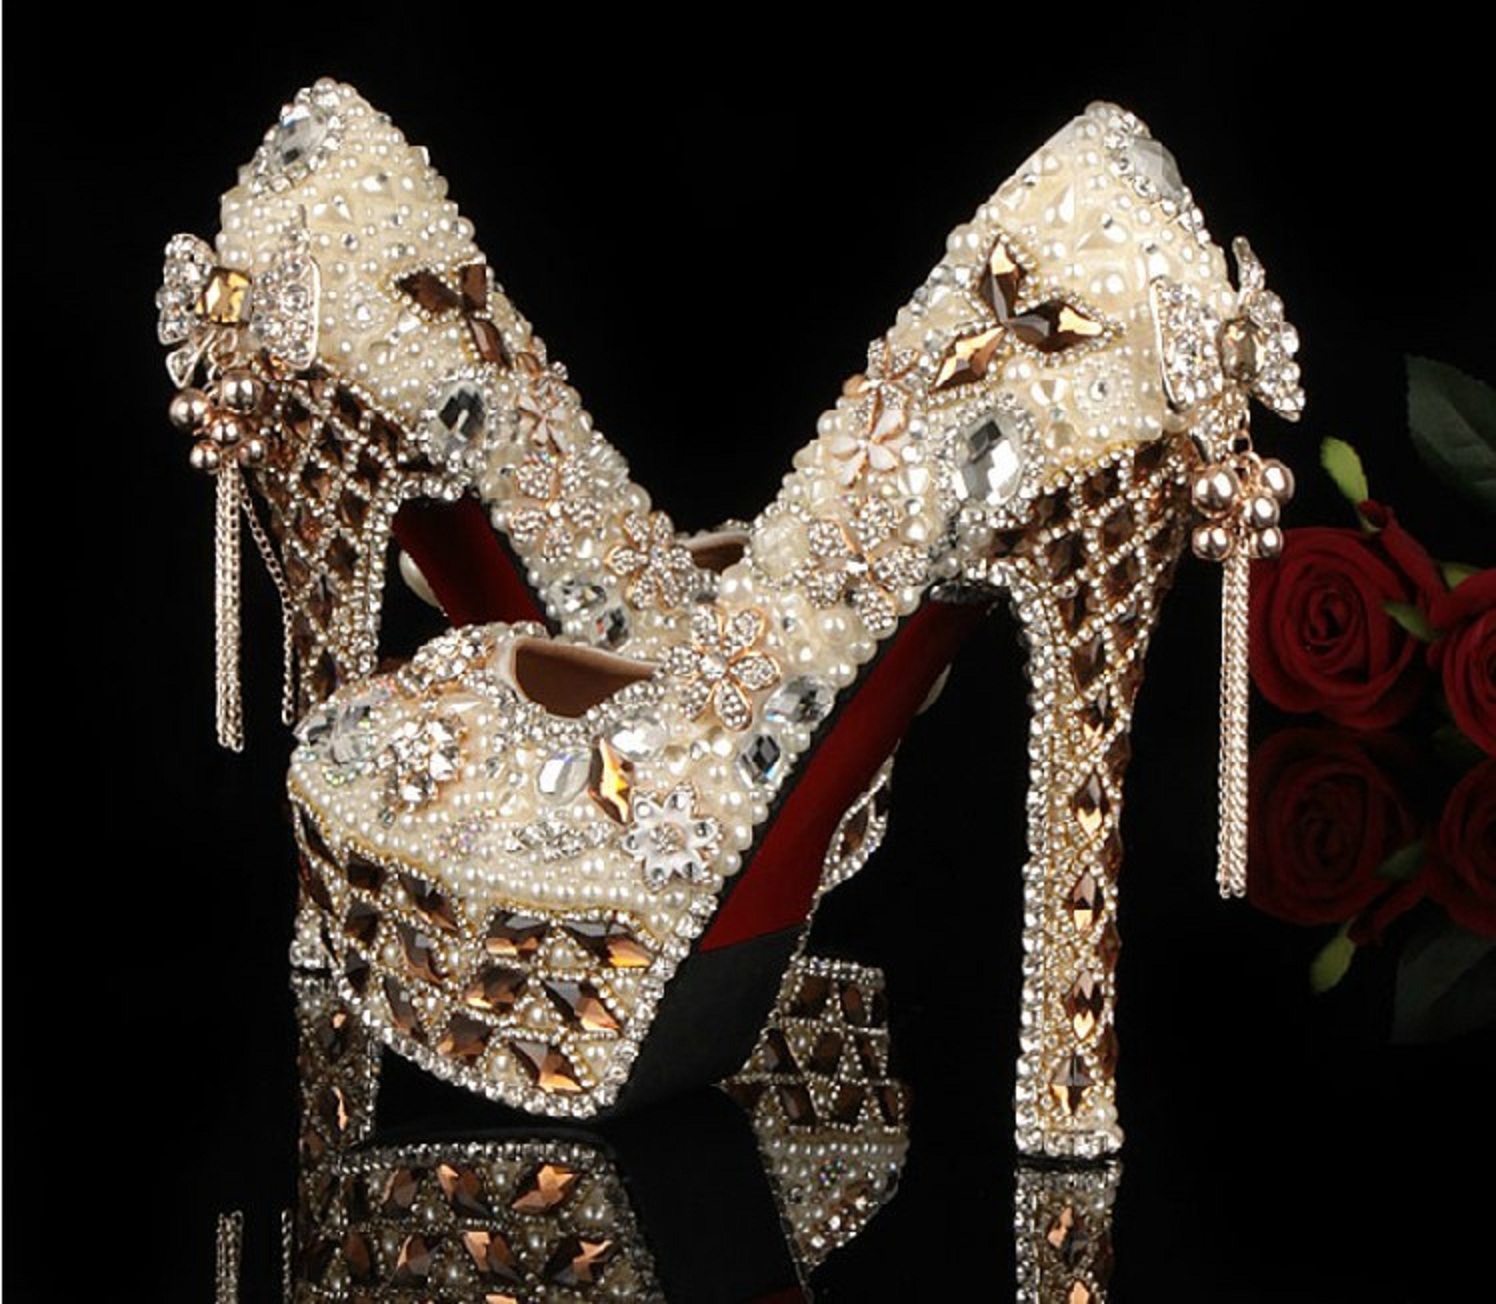 Super High Heel Shoes Collection For Girls Wallpaper All